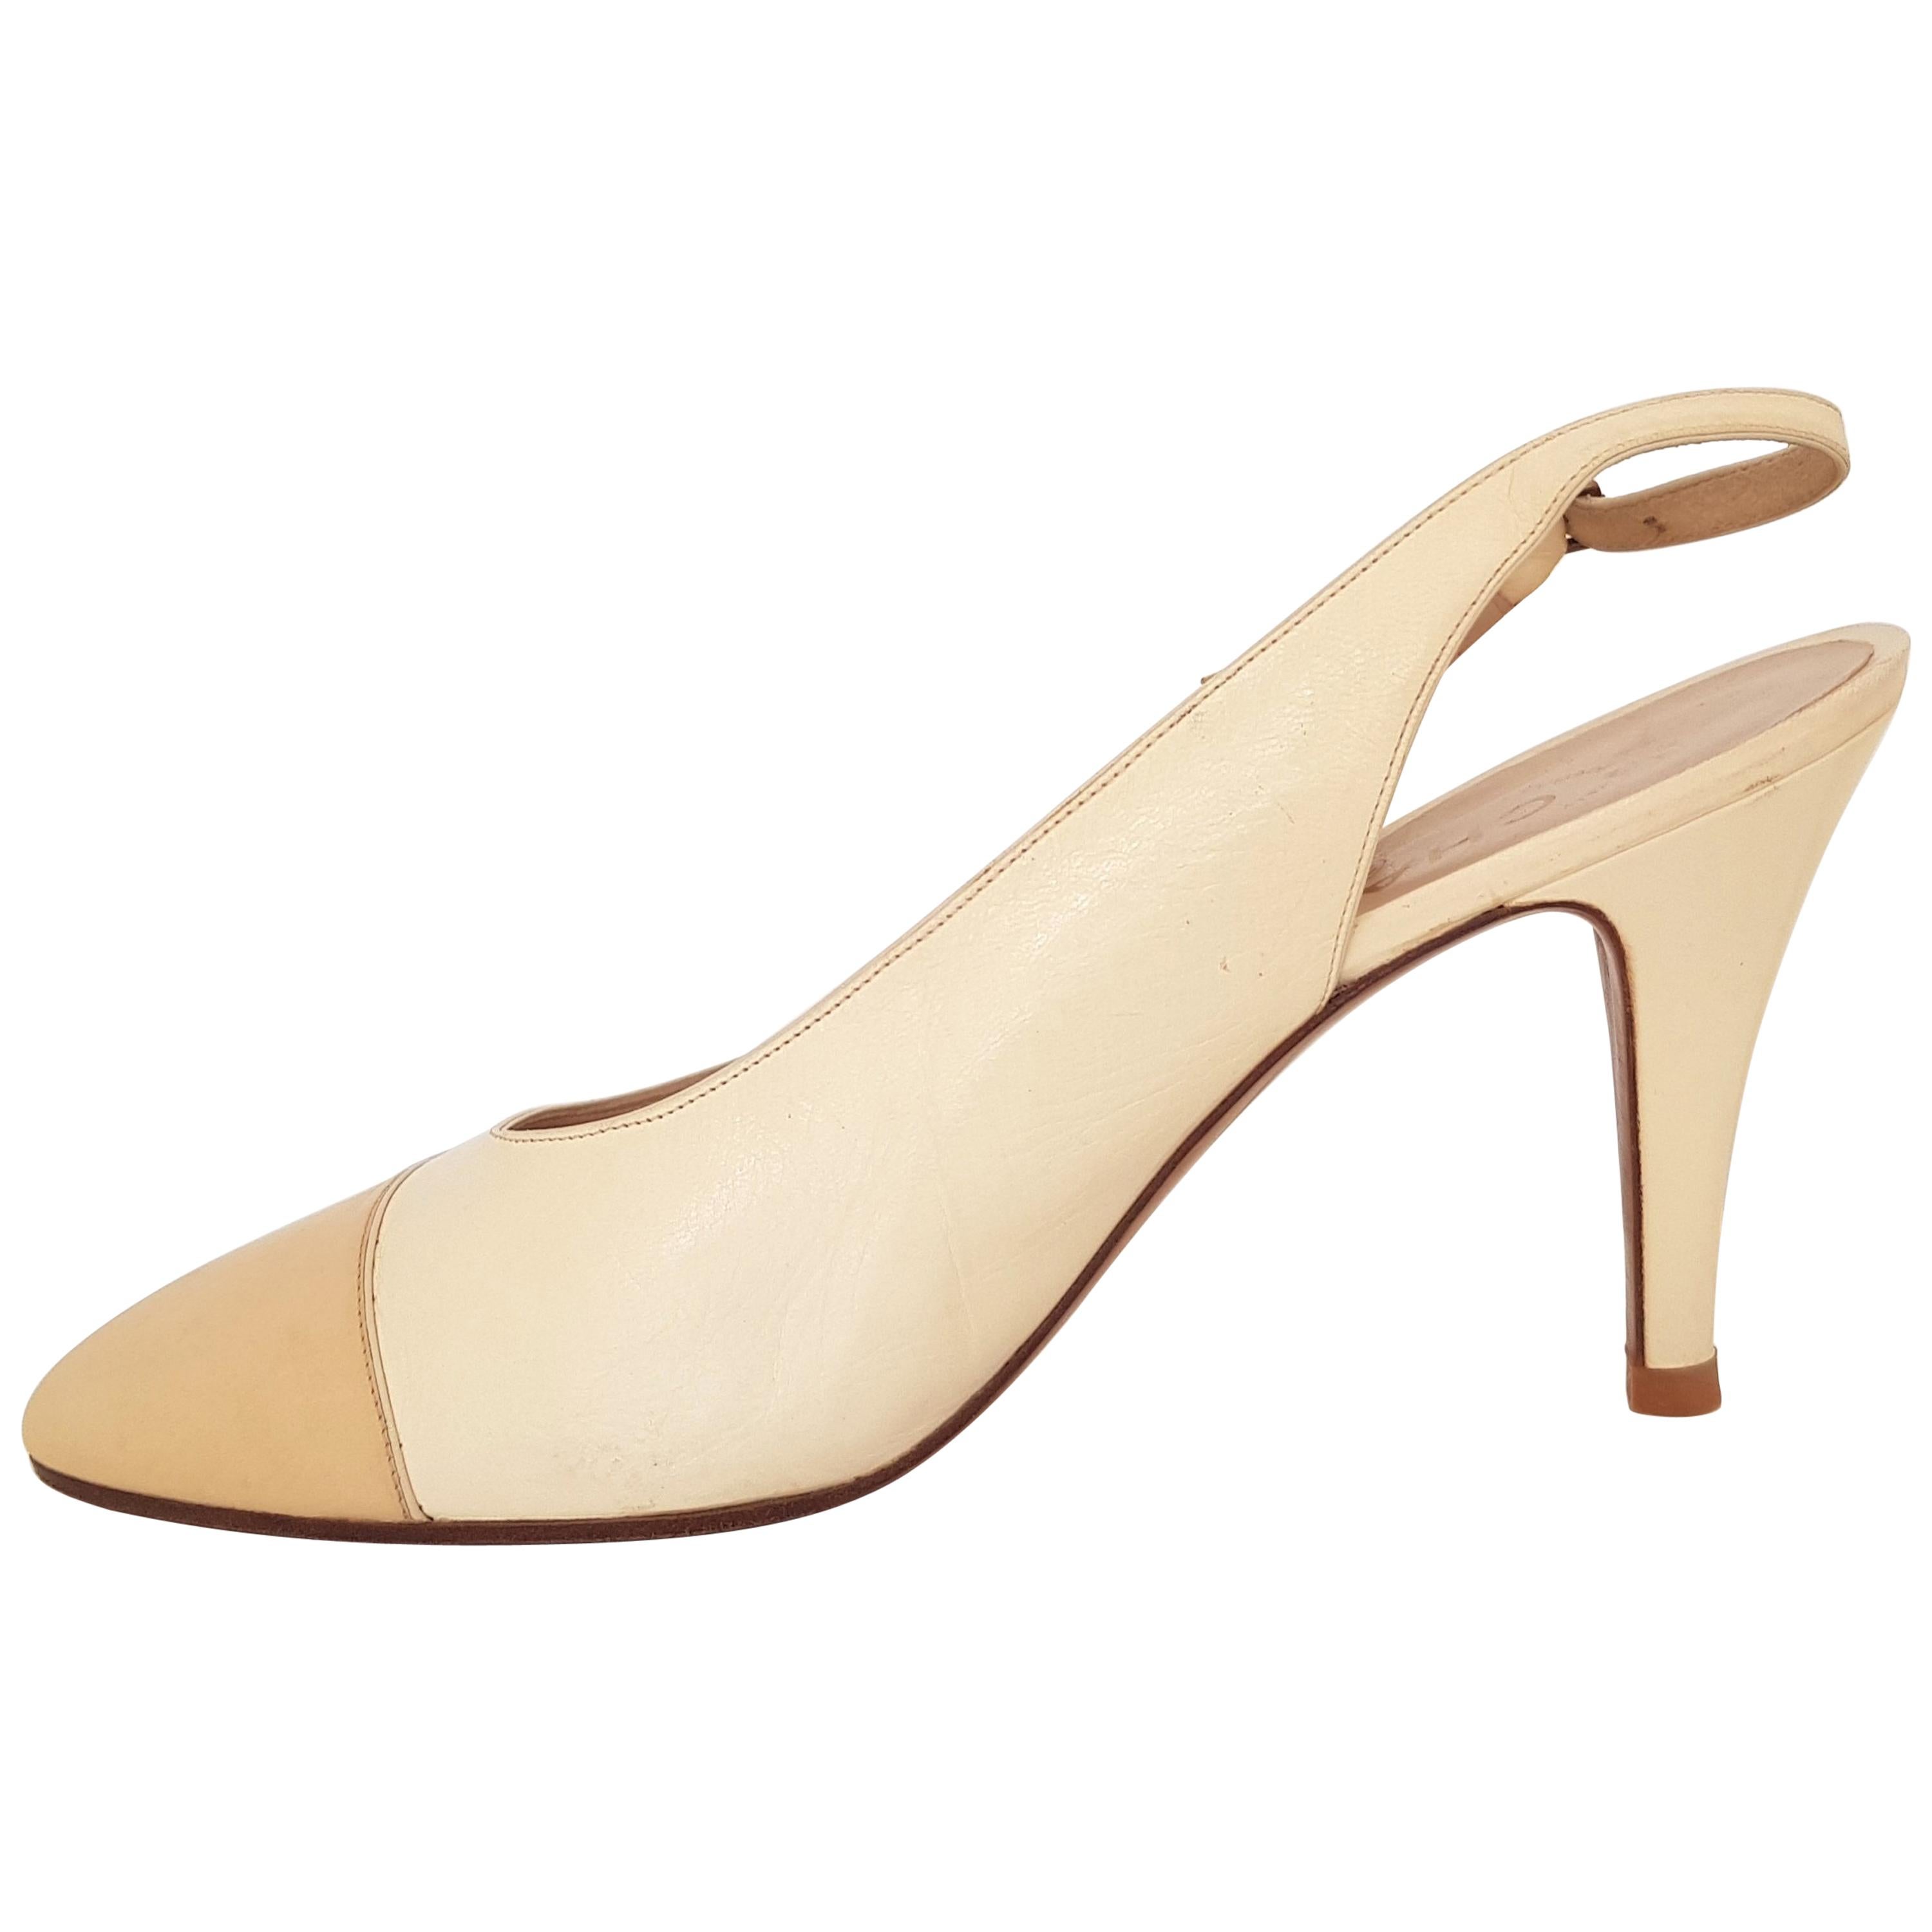 Chanel Beige Leather Slingback Heels. Great conditions. Size 40